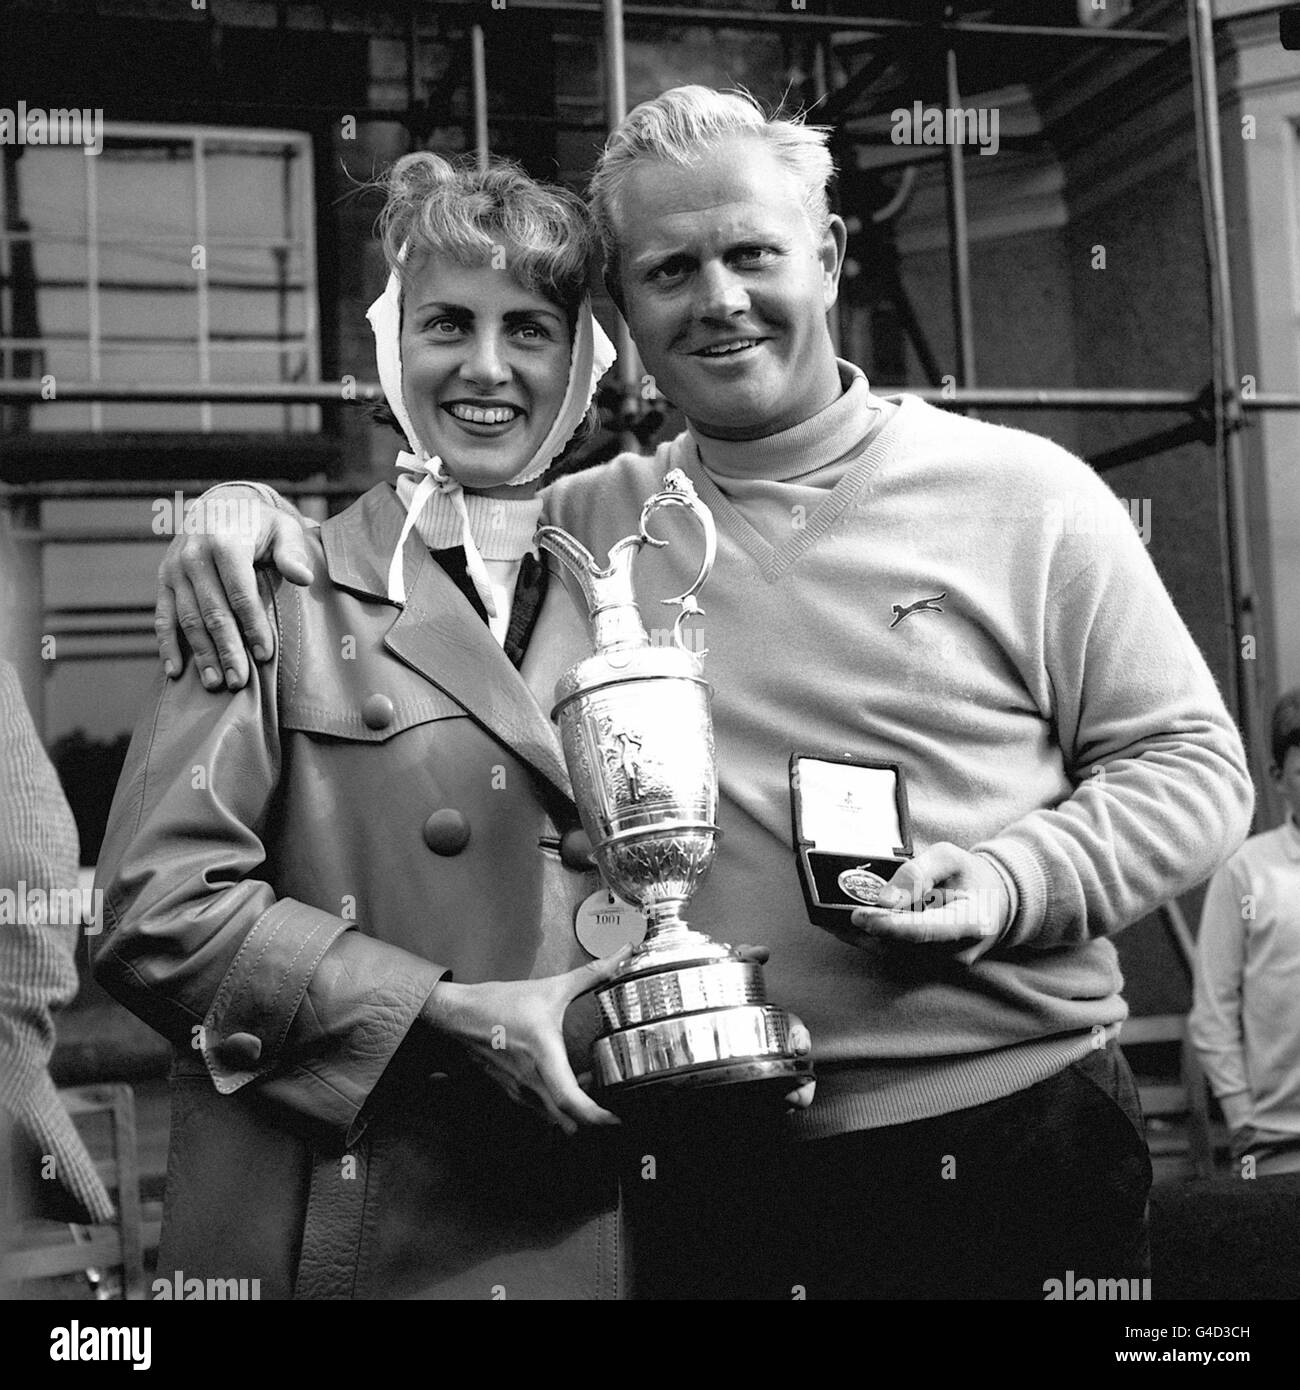 PA NEWS PHOTO 9/7/66 JACK NICKLAUS OF COLUMBUS, OHIO THE NEW BRITISH OPEN CHAMPION SHARES HIS TROPHY WITH HIS WIFE BARBARA AFTER WINNING THE TITLE AT MUIRFIELD, EAST LOTHIAN. Reissued 8/7/98 : Nicklaus, who has been to every Open since his debut at Troon in 1962, has announced that he will not be playing in next week's Open at Birkdale. Stock Photo